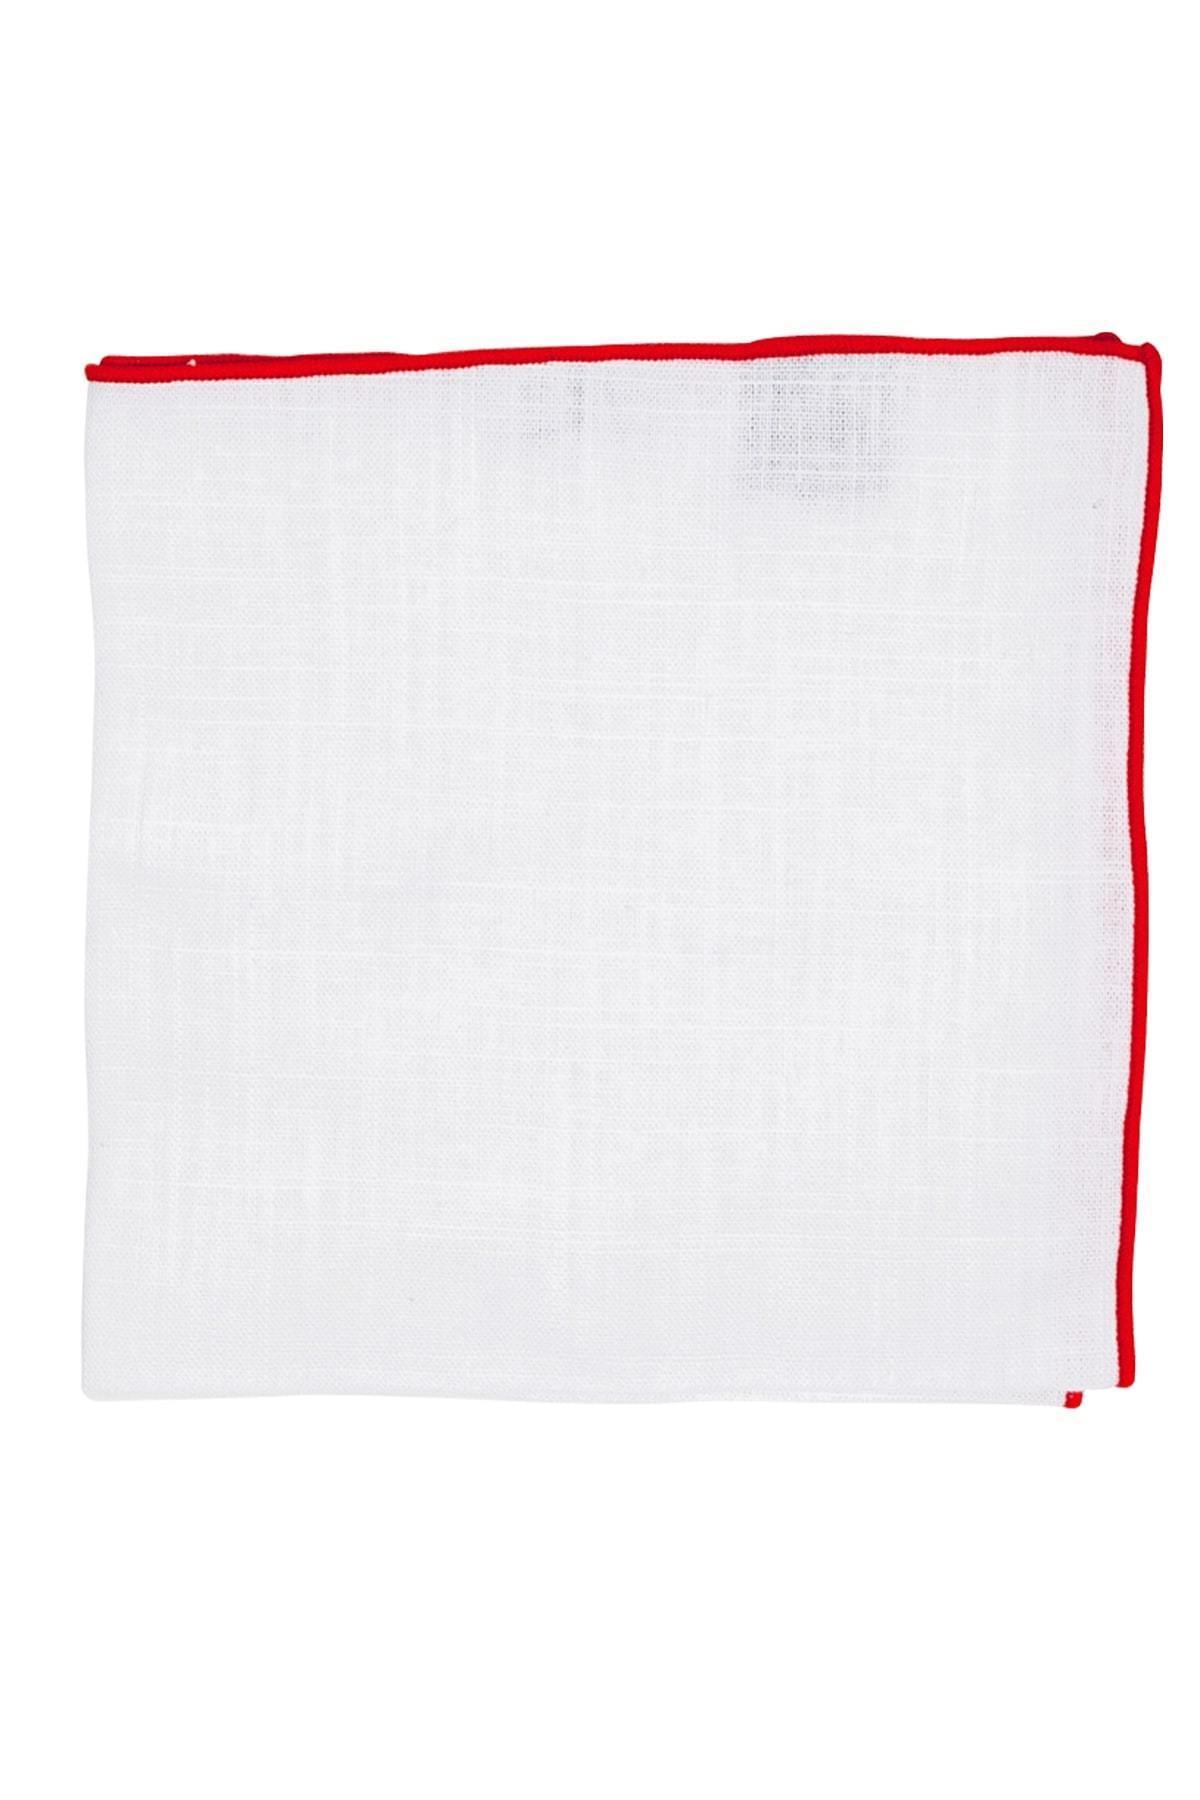 An ivy Pocket square Red Borders